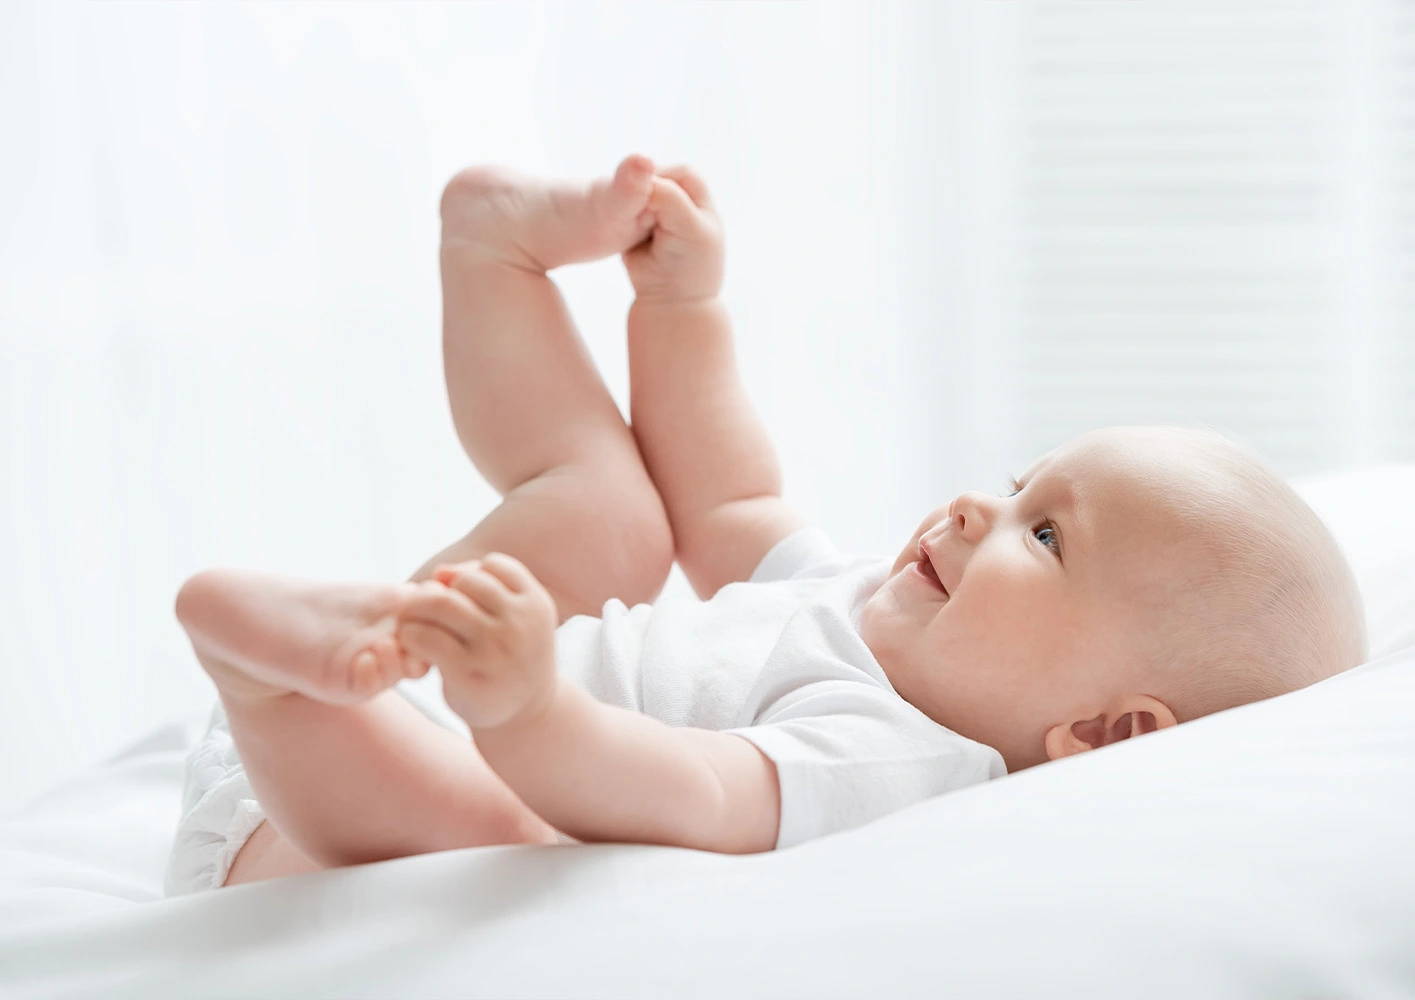 Baby Body Language - What Is Your Baby Trying To Tell You?